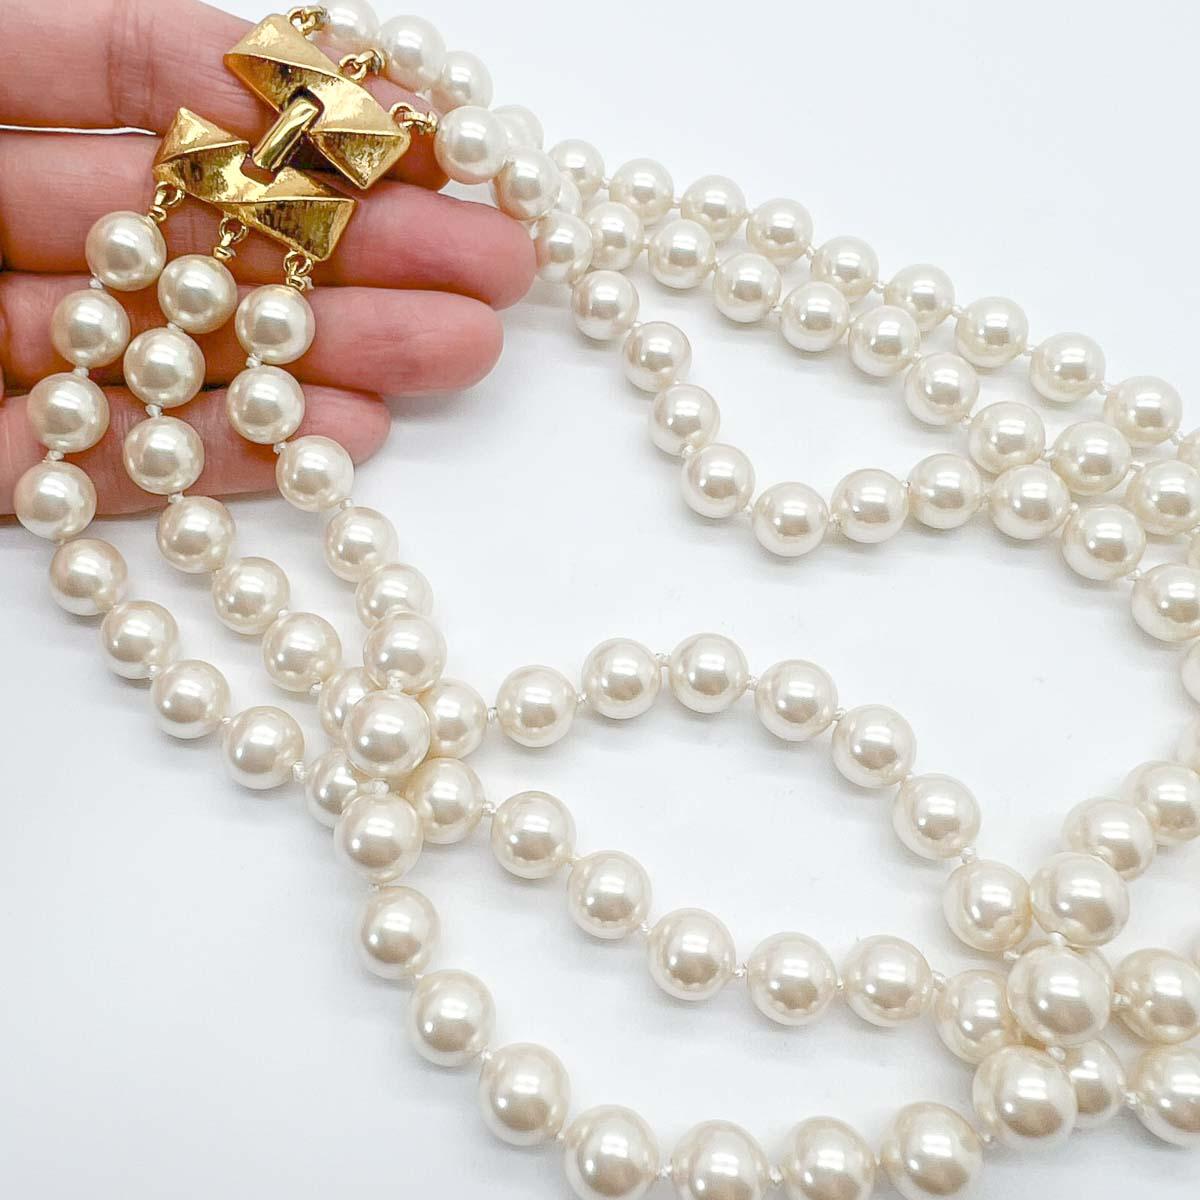 1980s Monet Goldtone 3-Strand White, Tan & Silver Faux-Pearls Necklace |  Chairish